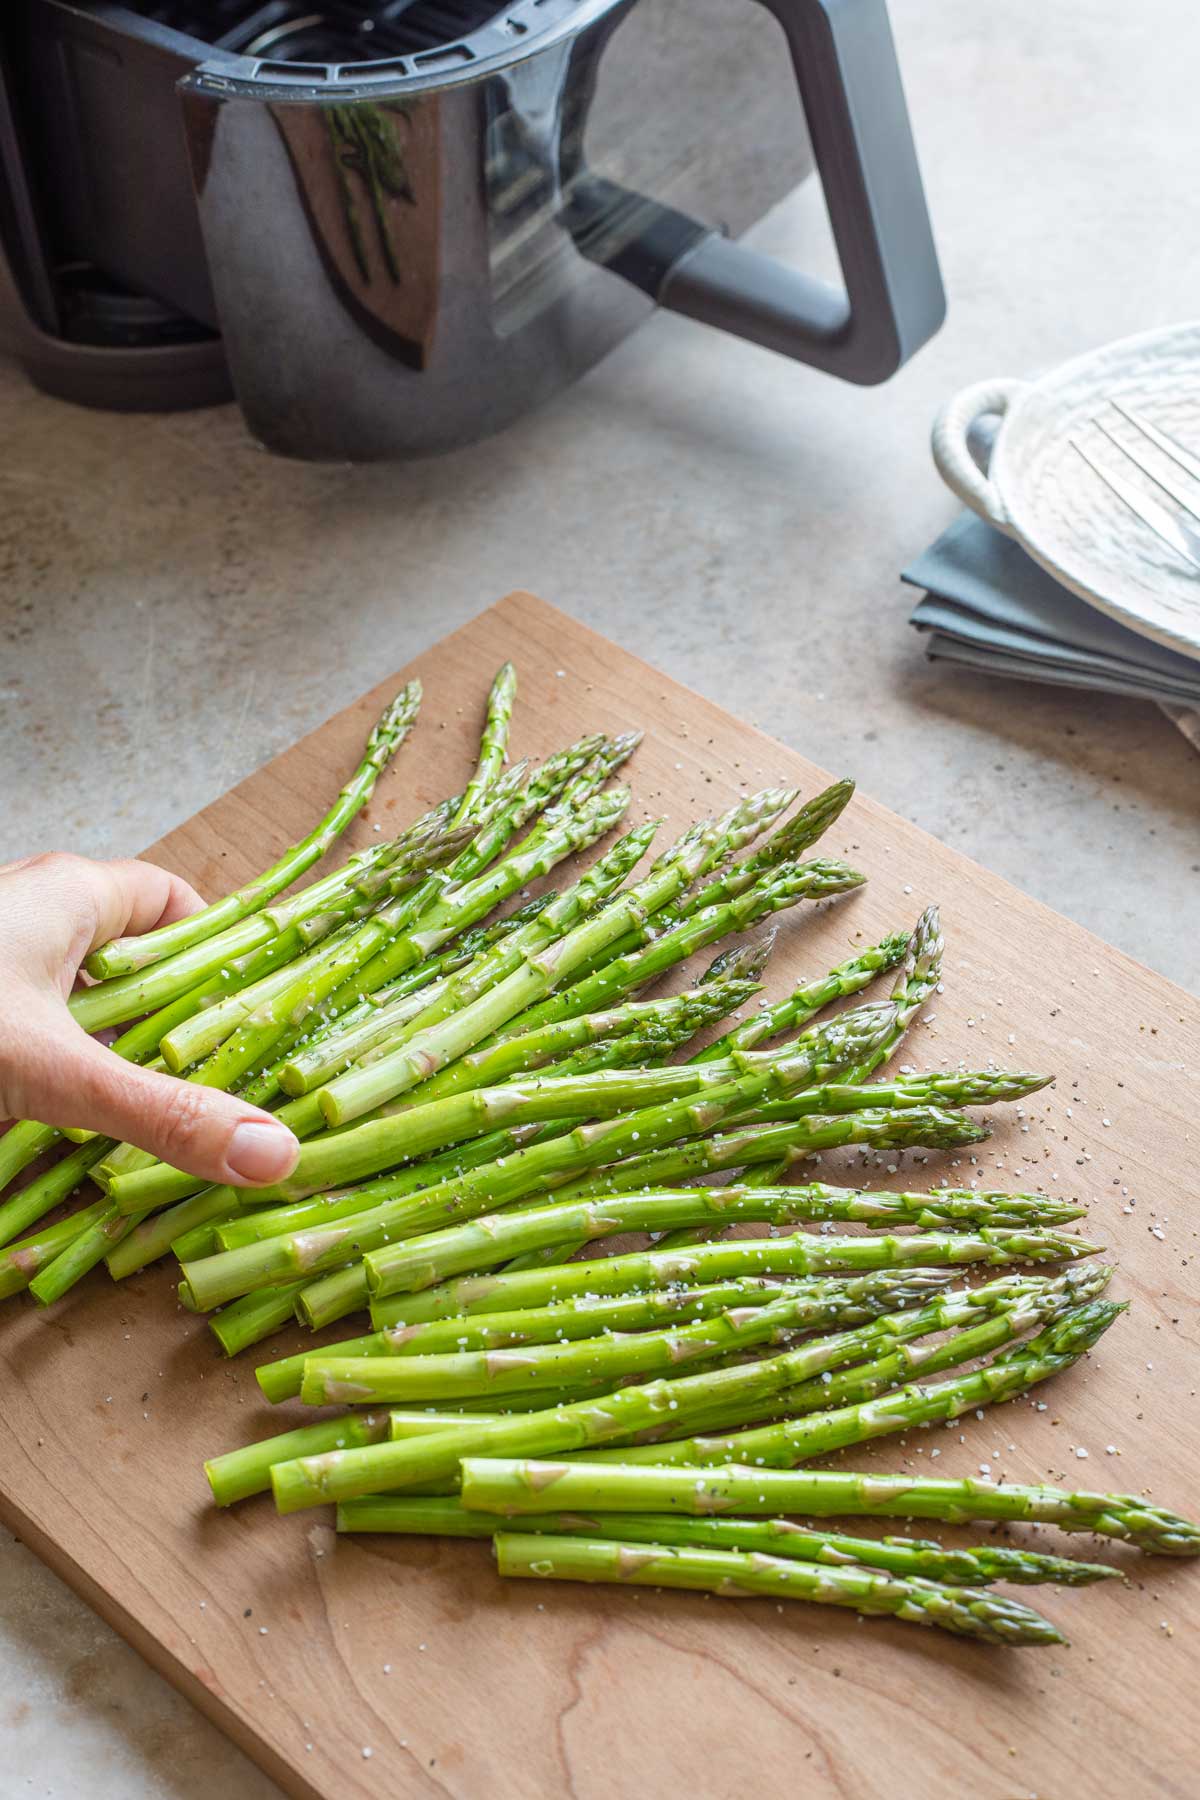 Hand reaching in to toss raw asparagus with extra virgin olive oil and seasoning before being put into the air fryer in background.